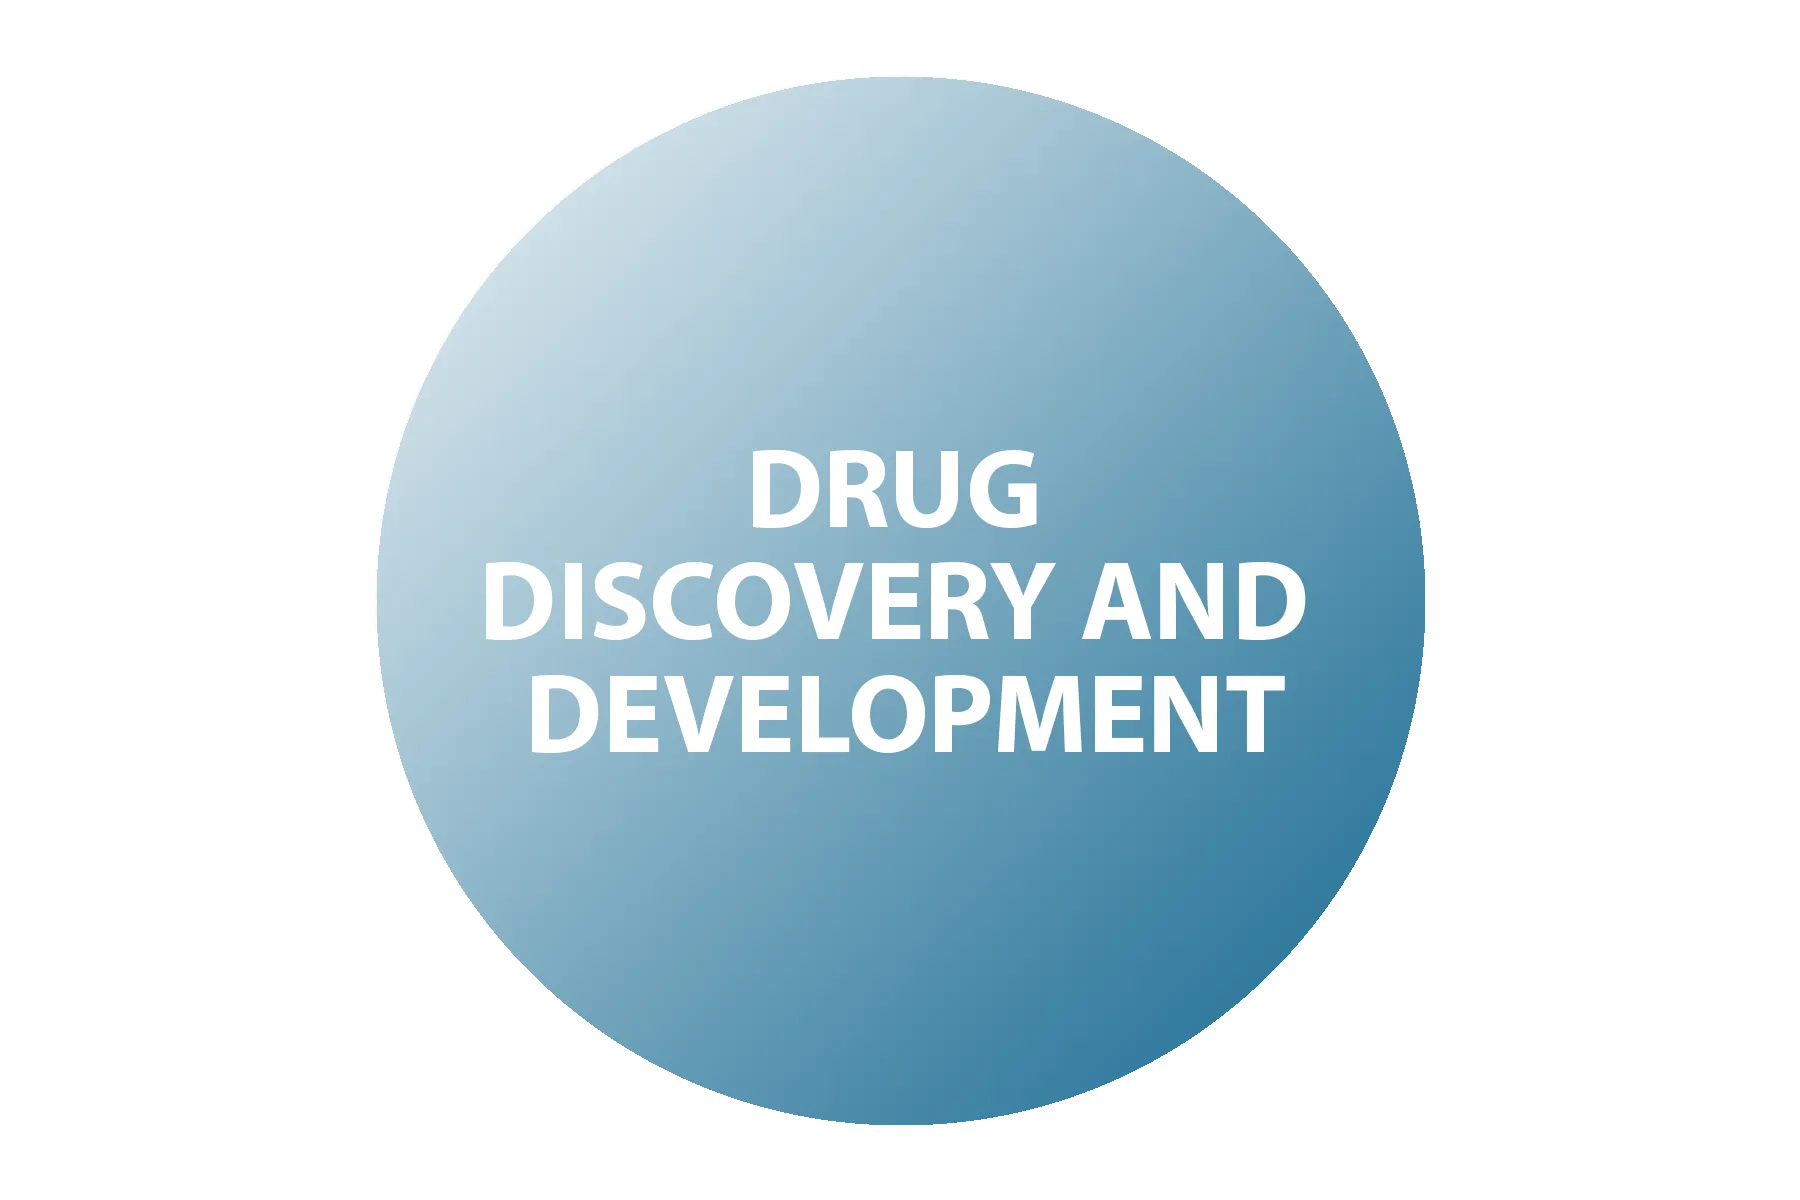 Drug discovery and development